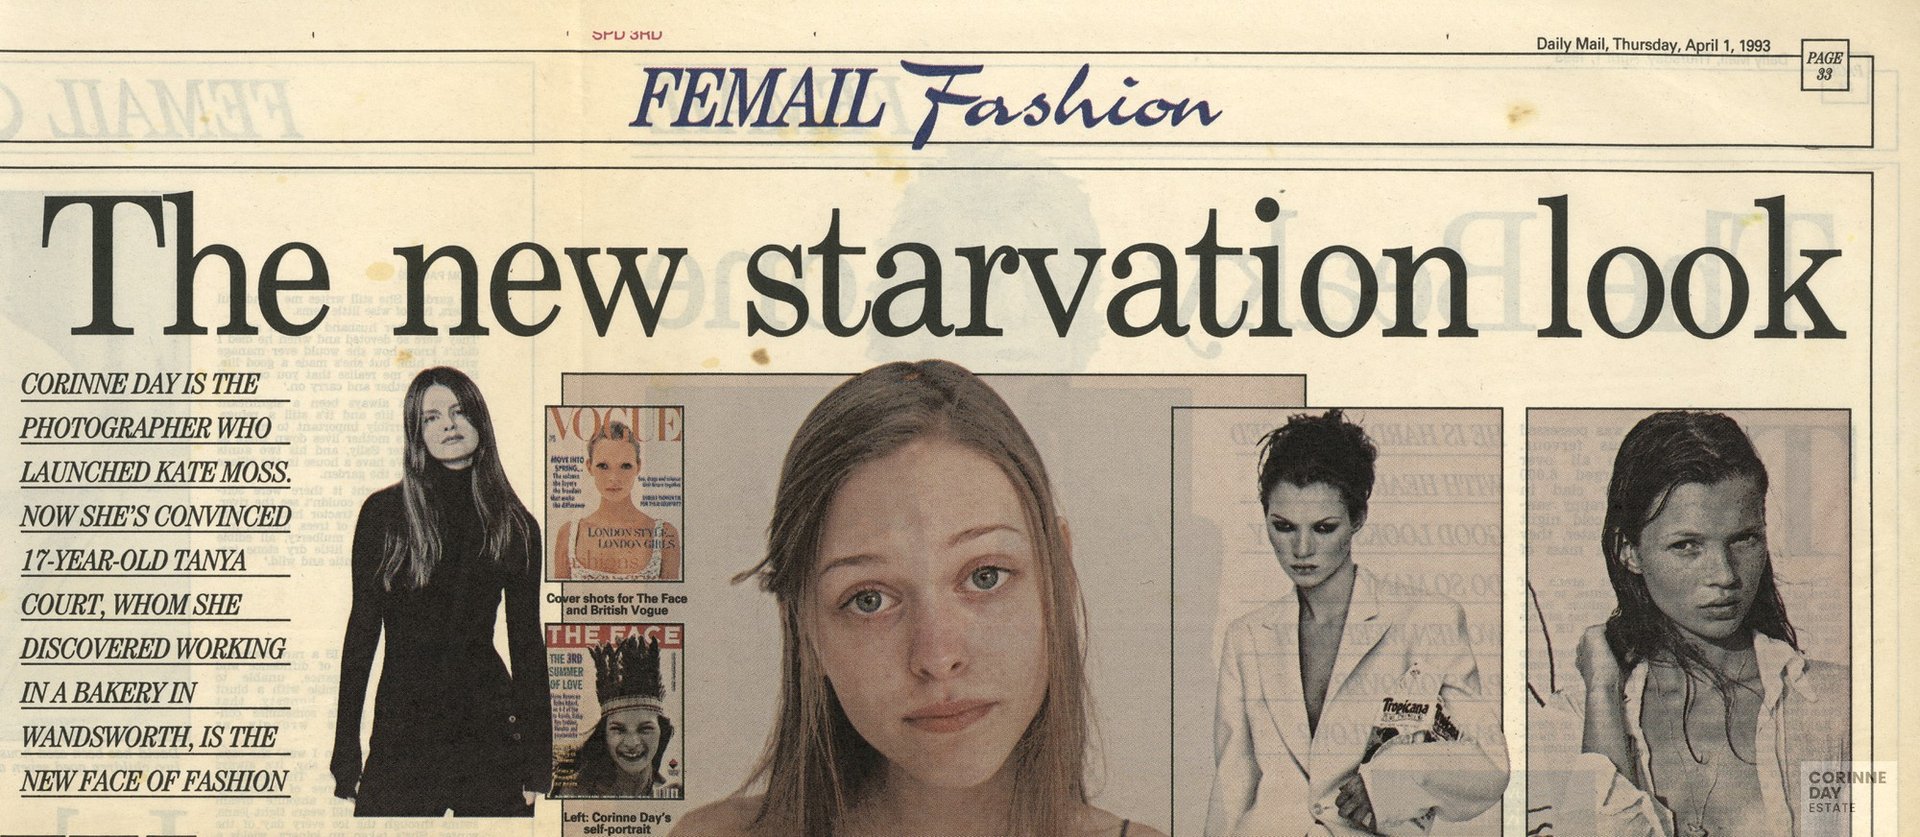 The new starvation look, Daily Mail, 1 Apr 1993 — Image 1 of 2